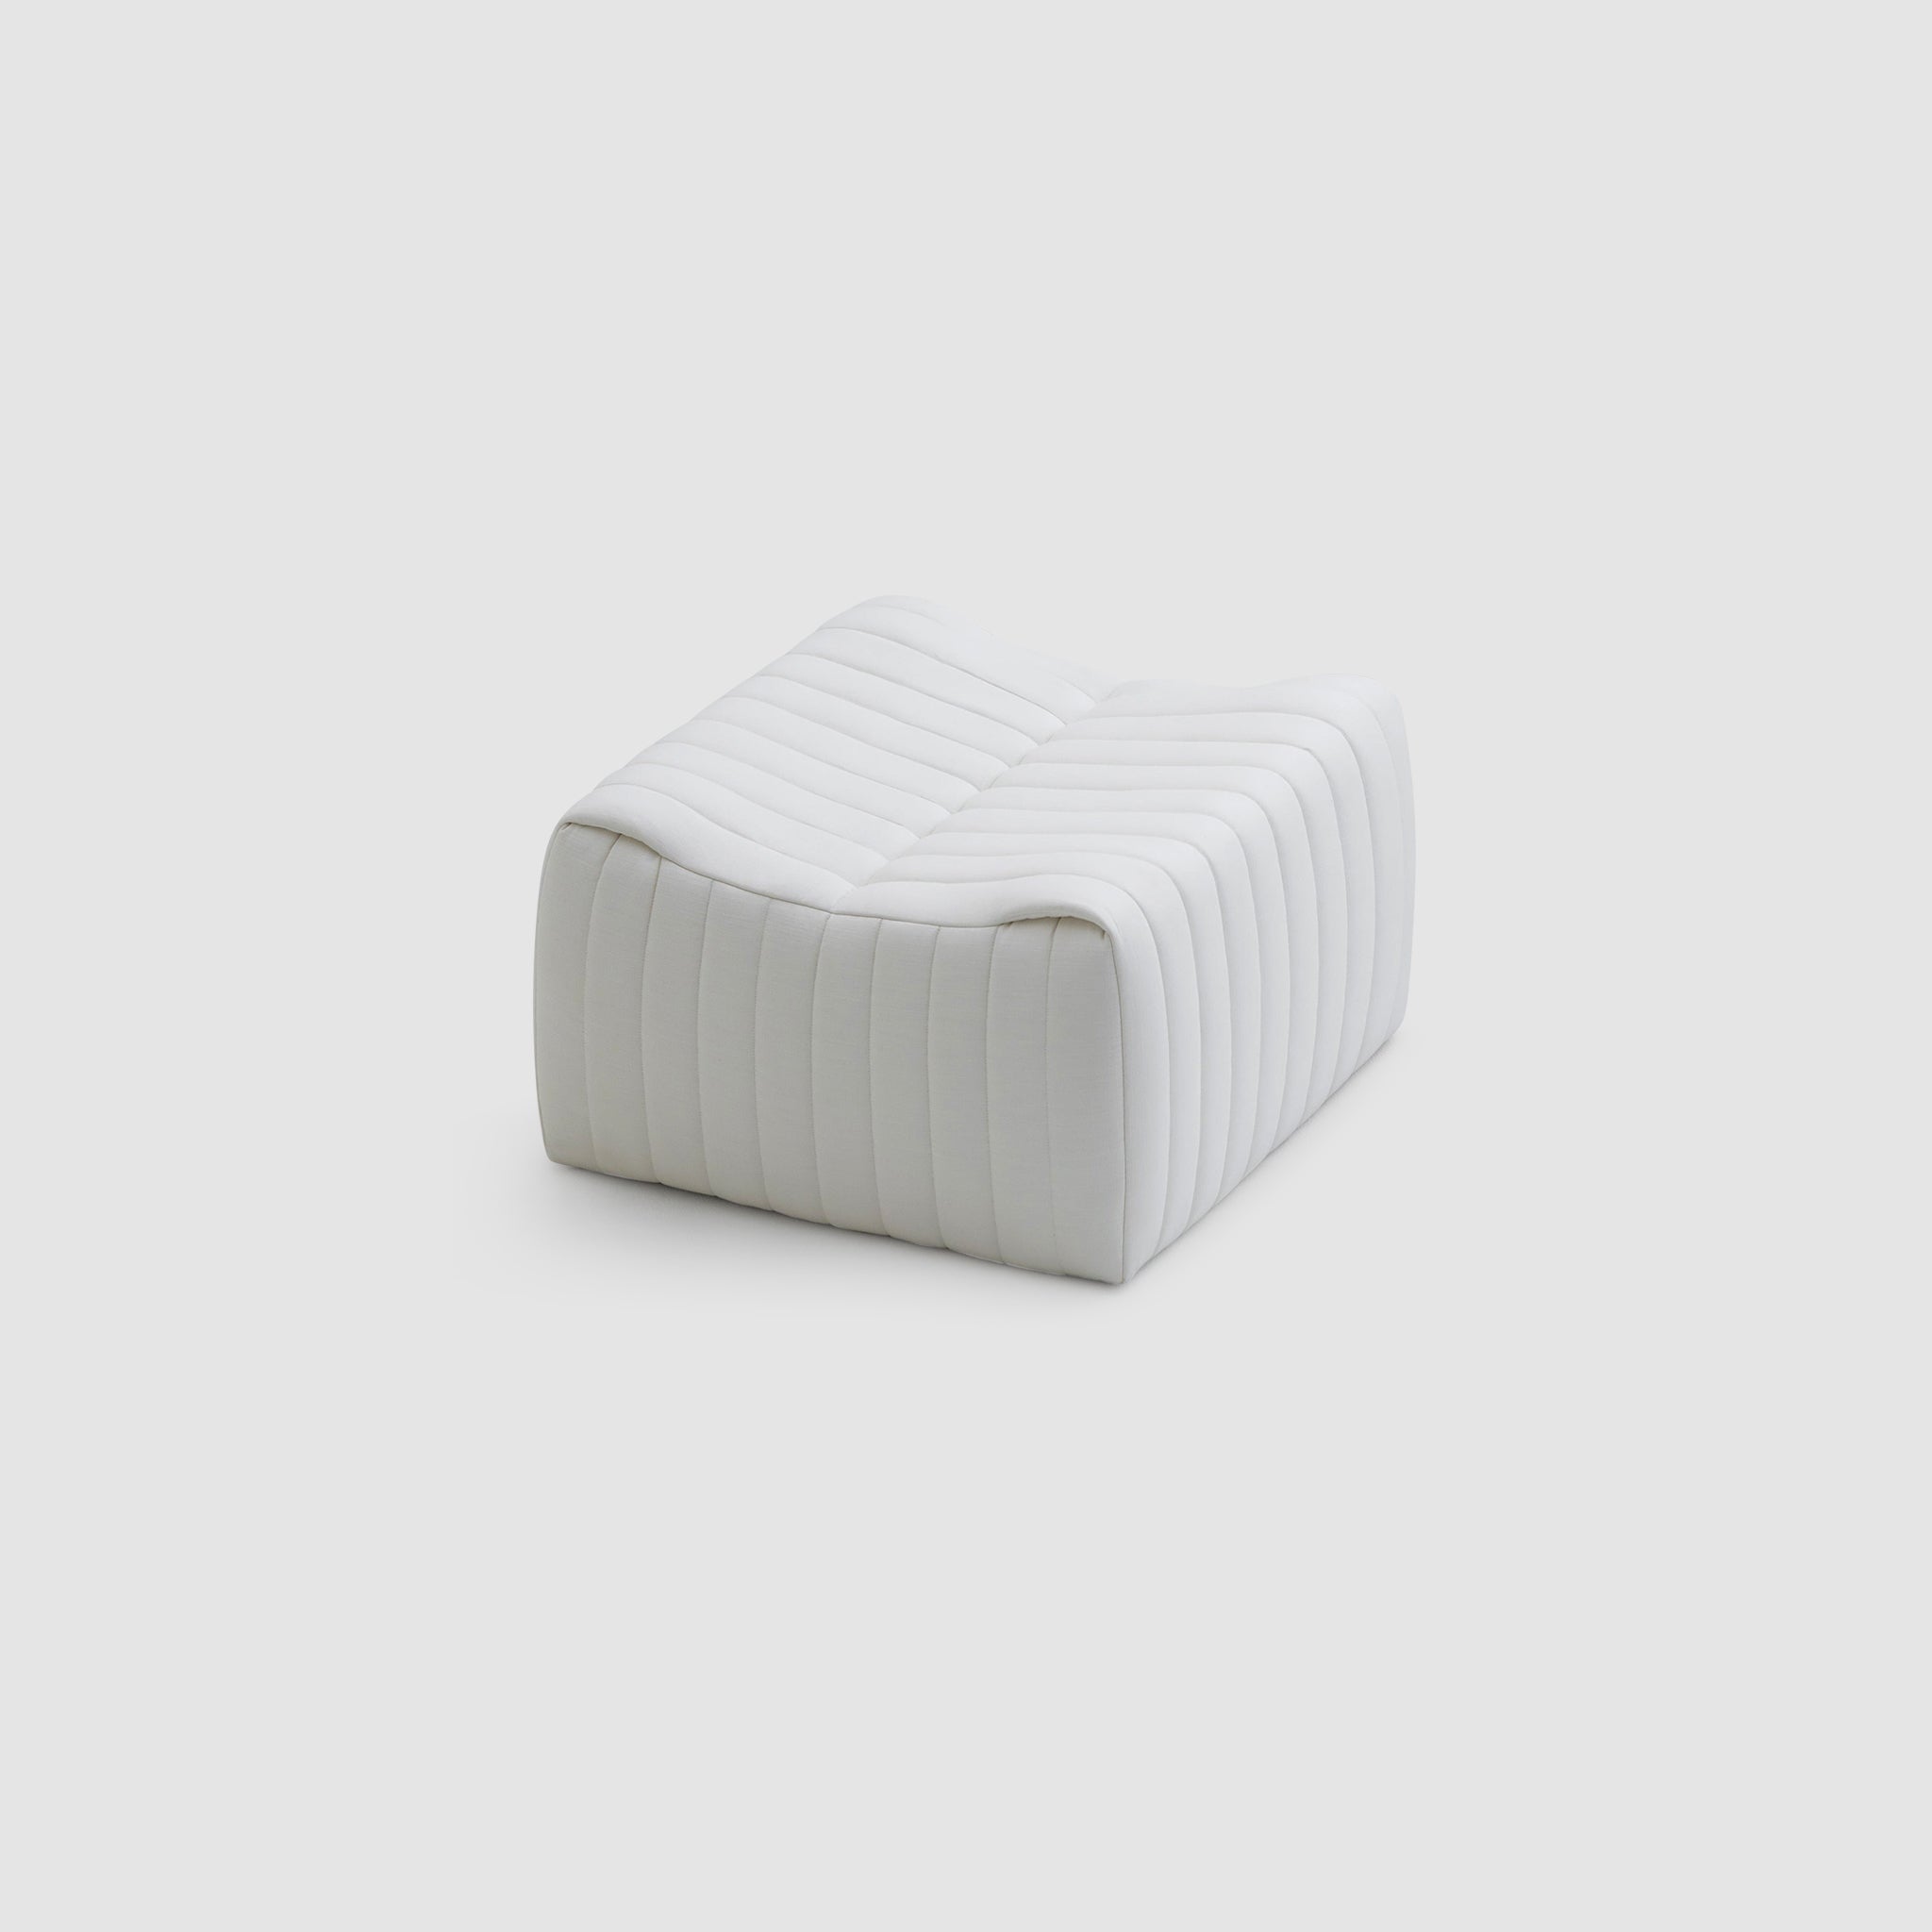 Modern white upholstered ottoman with a sleek, quilted design, featuring curved edges and horizontal stitching, known as The Wren Ottoman.